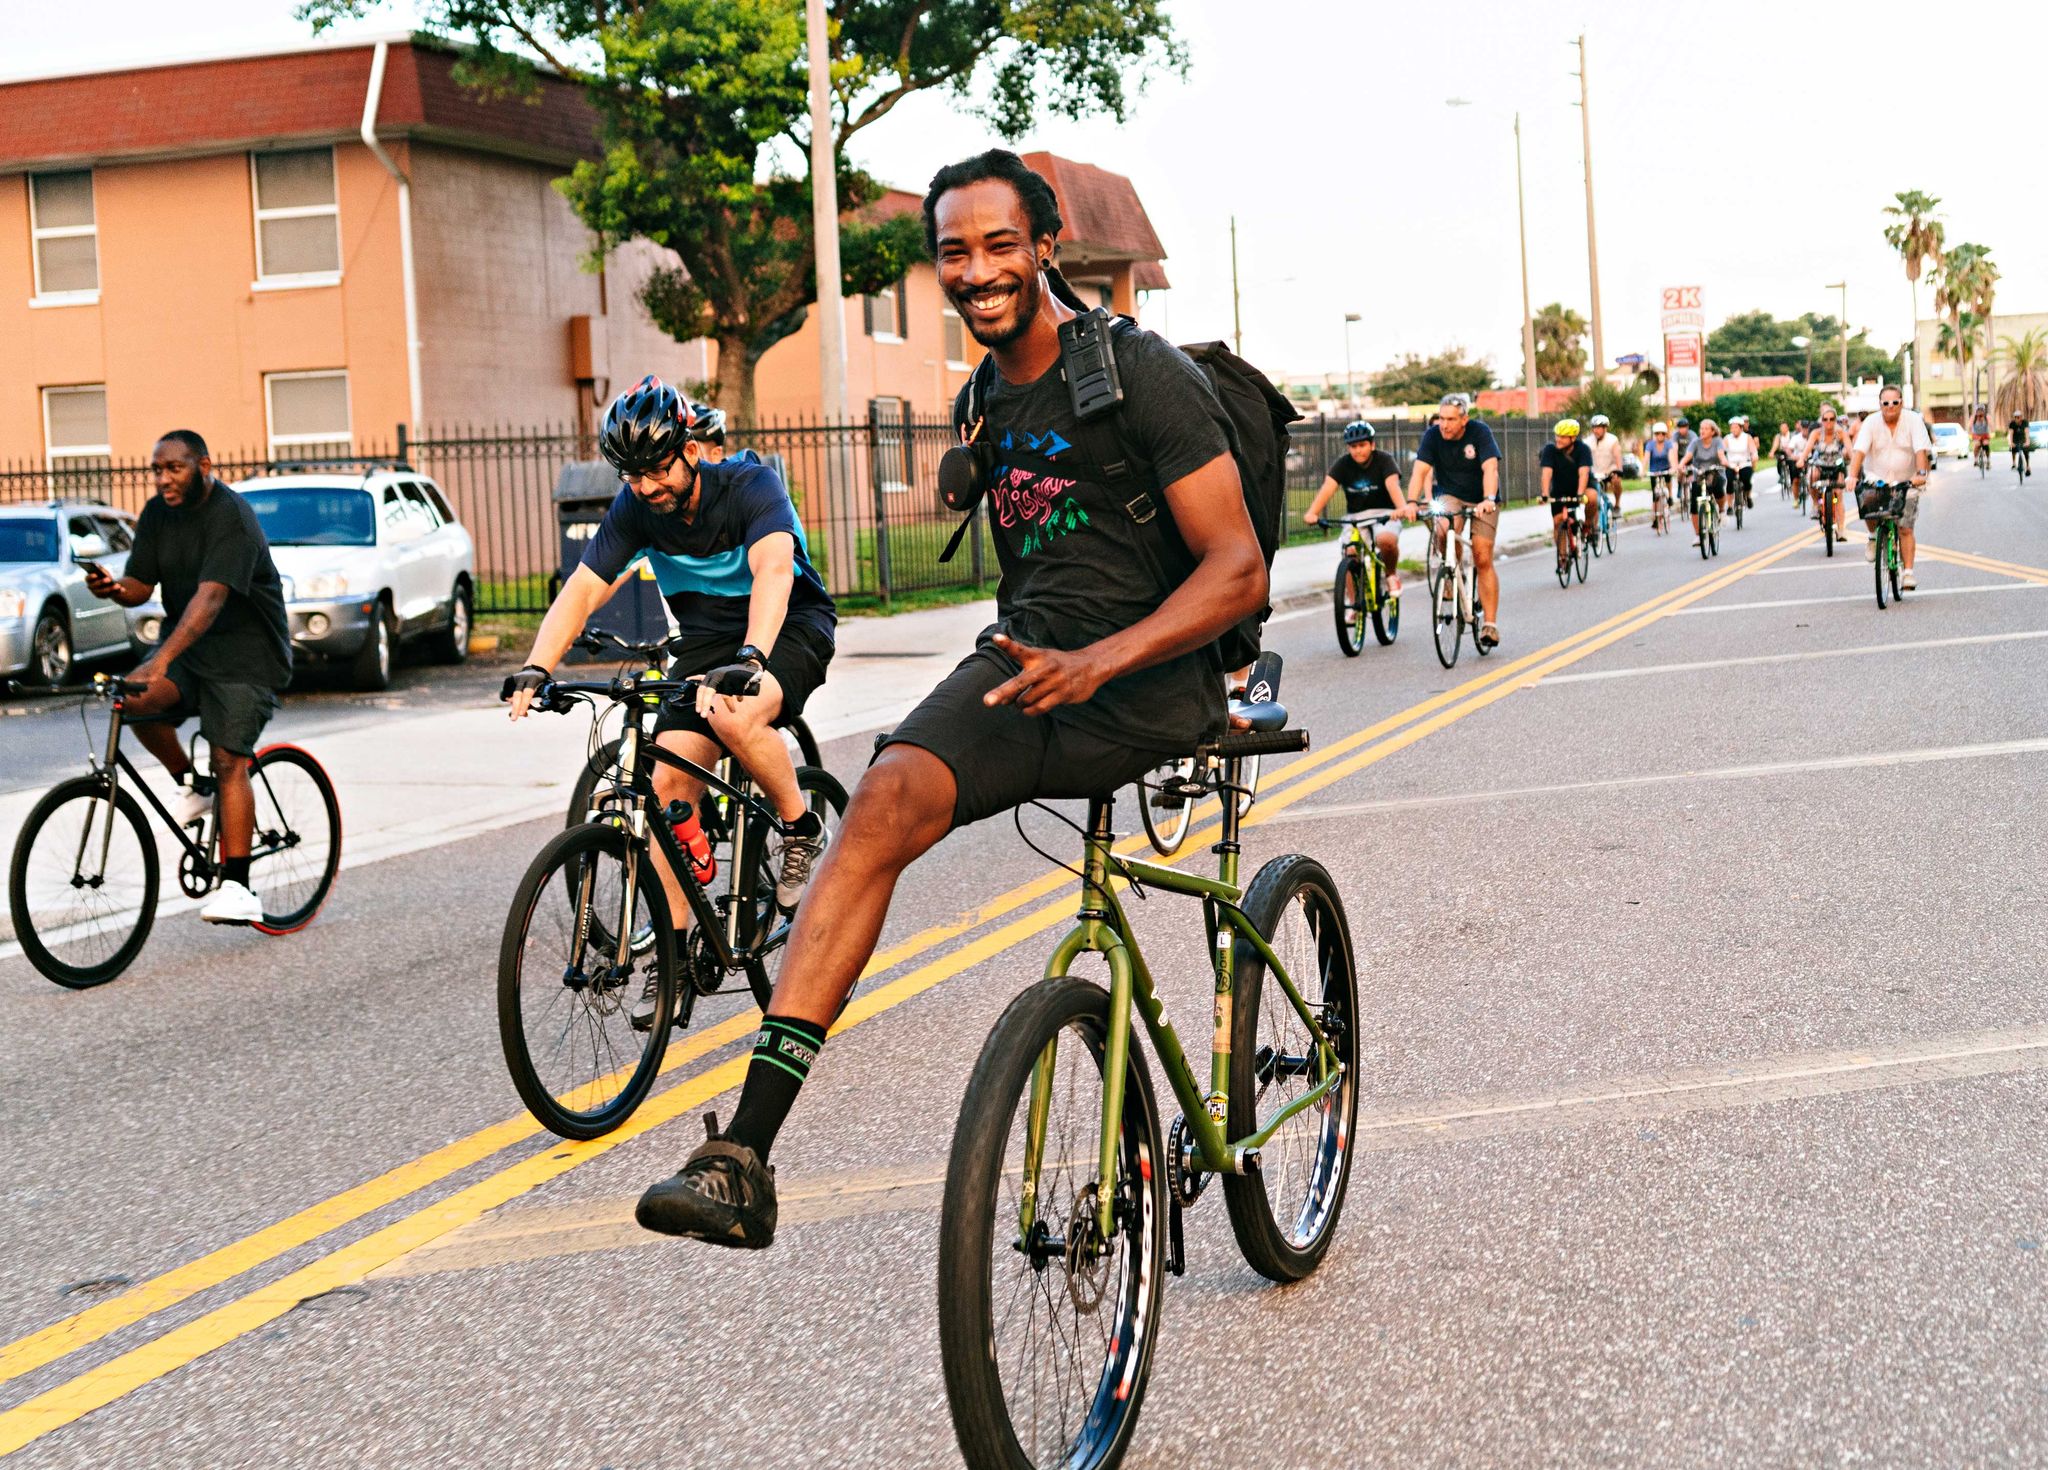 leo rodgers coasts down a hill on his handlebar during a critical mass ride in ybor city, florida in july 2018